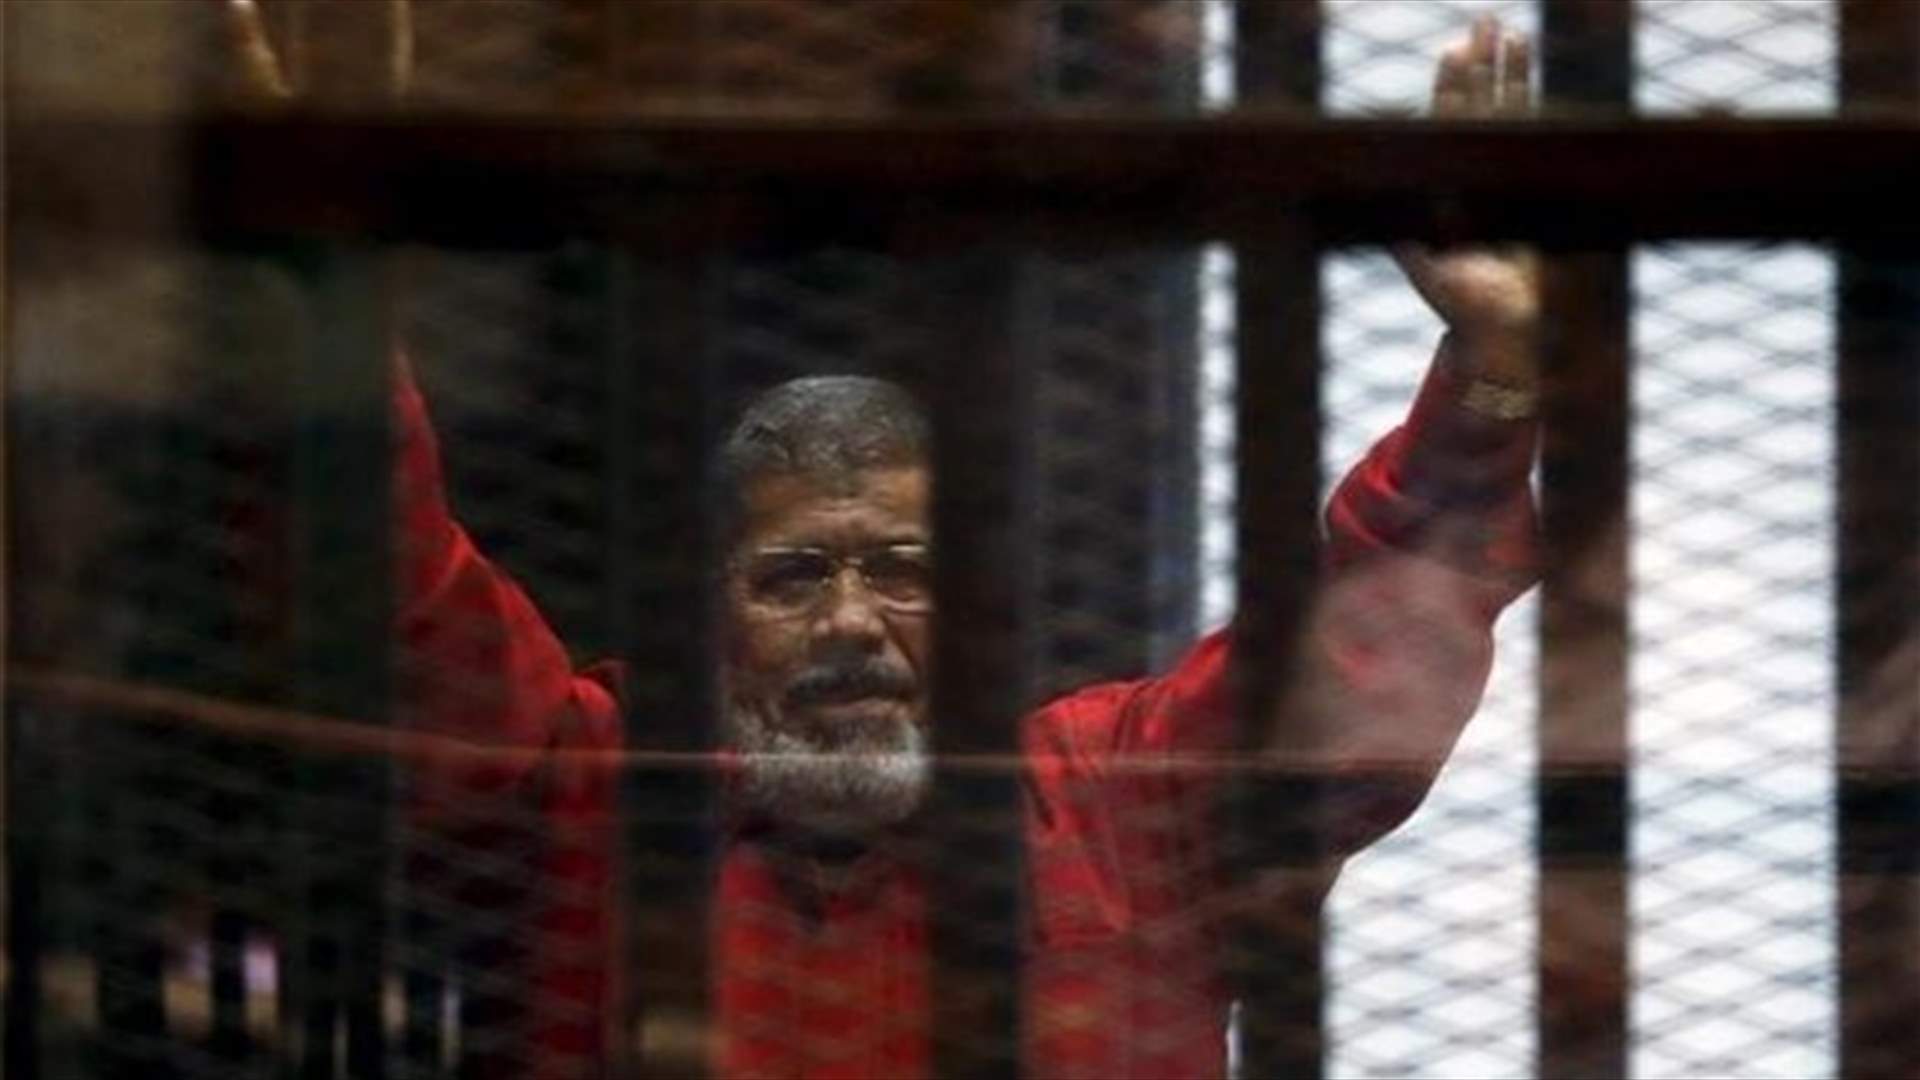 Egyptian court recommends death penalty for journalists, Mursi verdict postponed